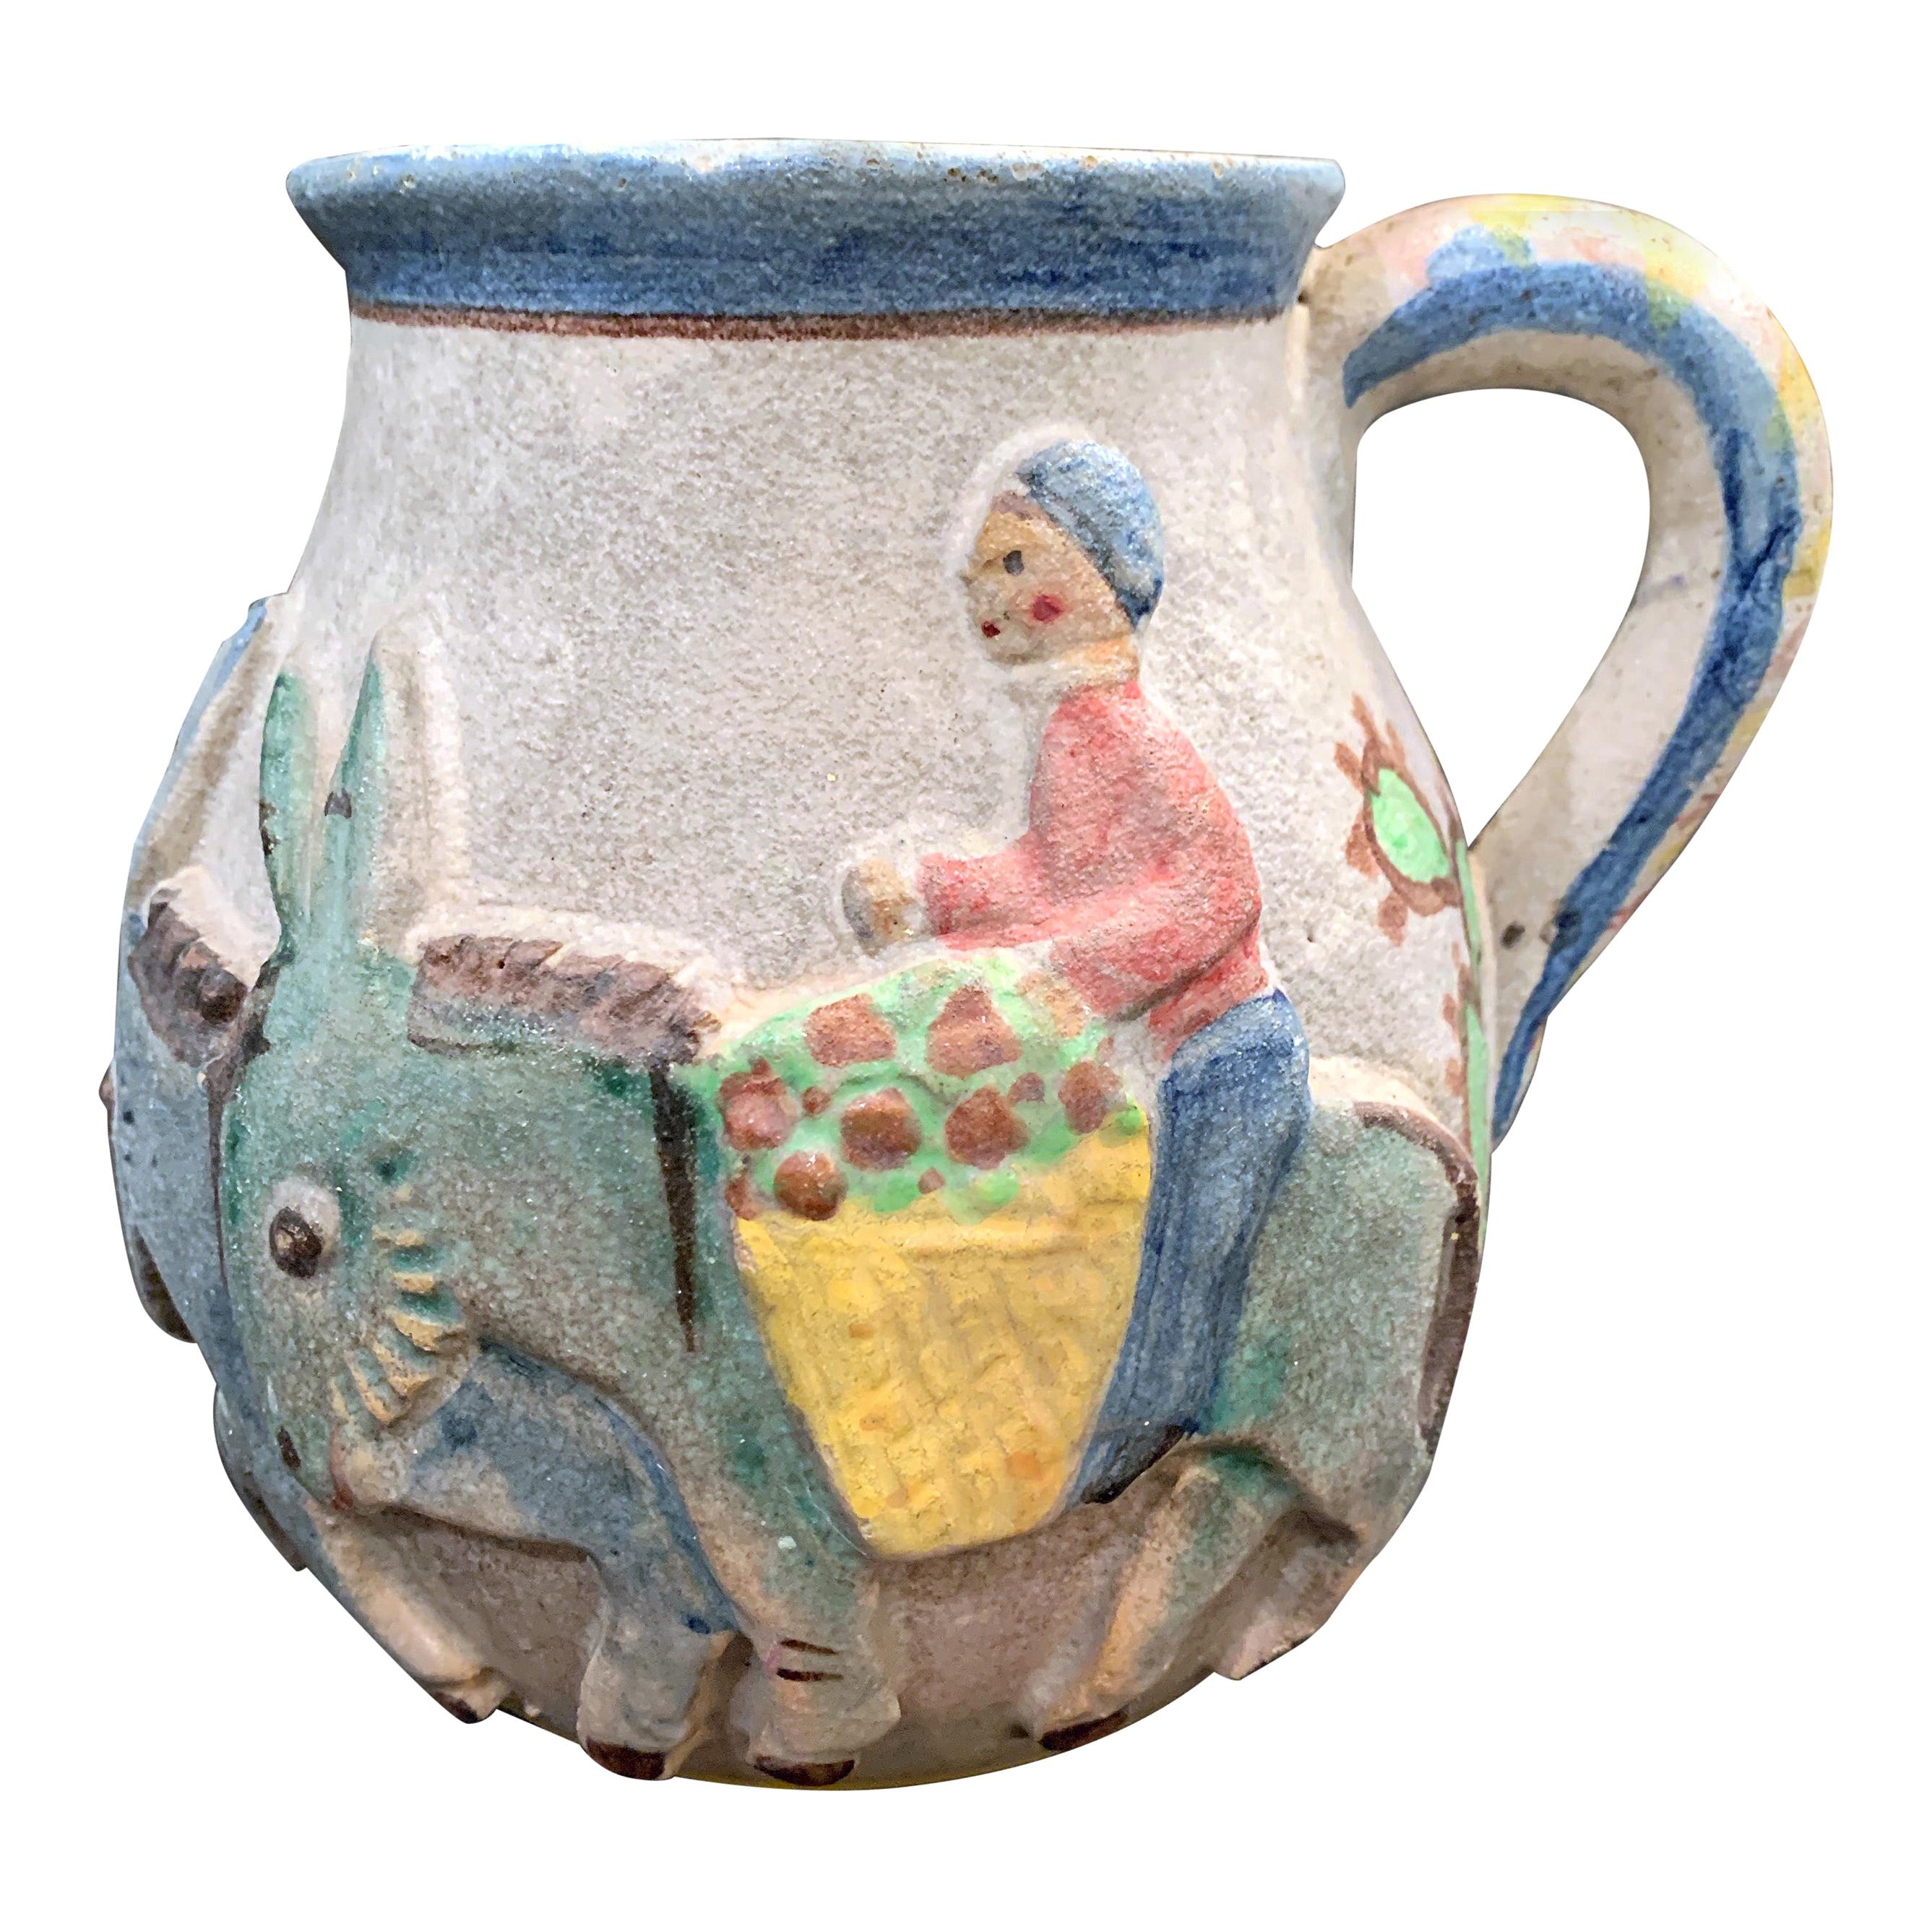 "Riding to Market," Charming and Important Modern Pitcher by ICS, Likely Gambone